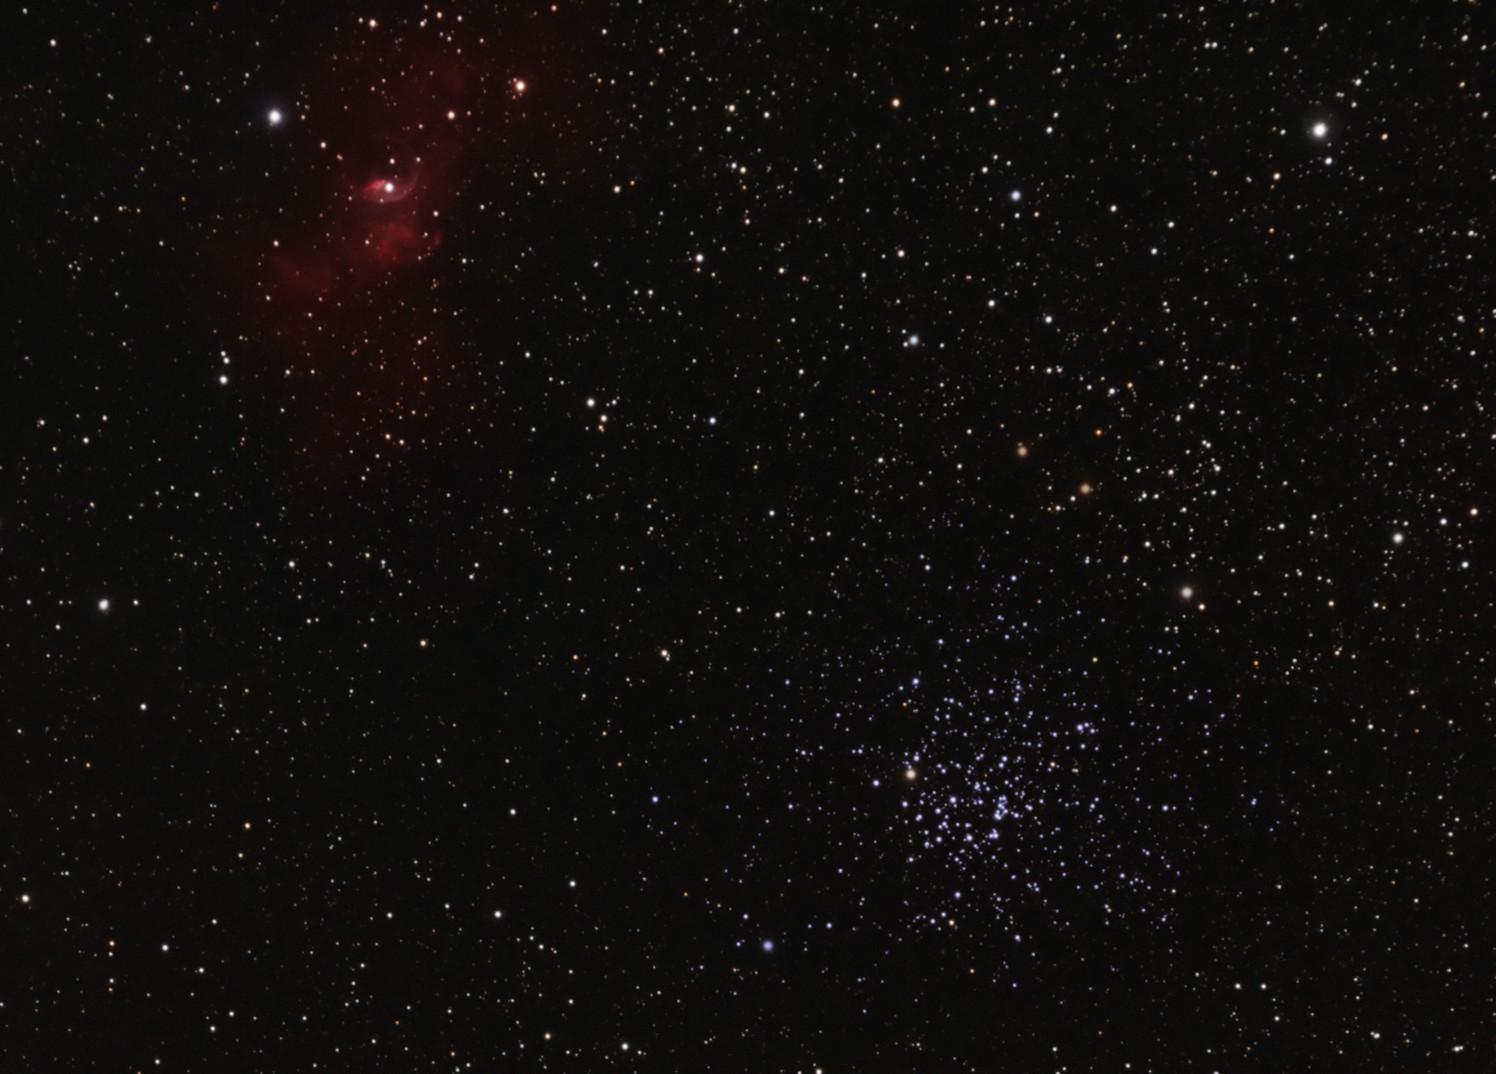 The Bubble Nebula and M52 star cluster